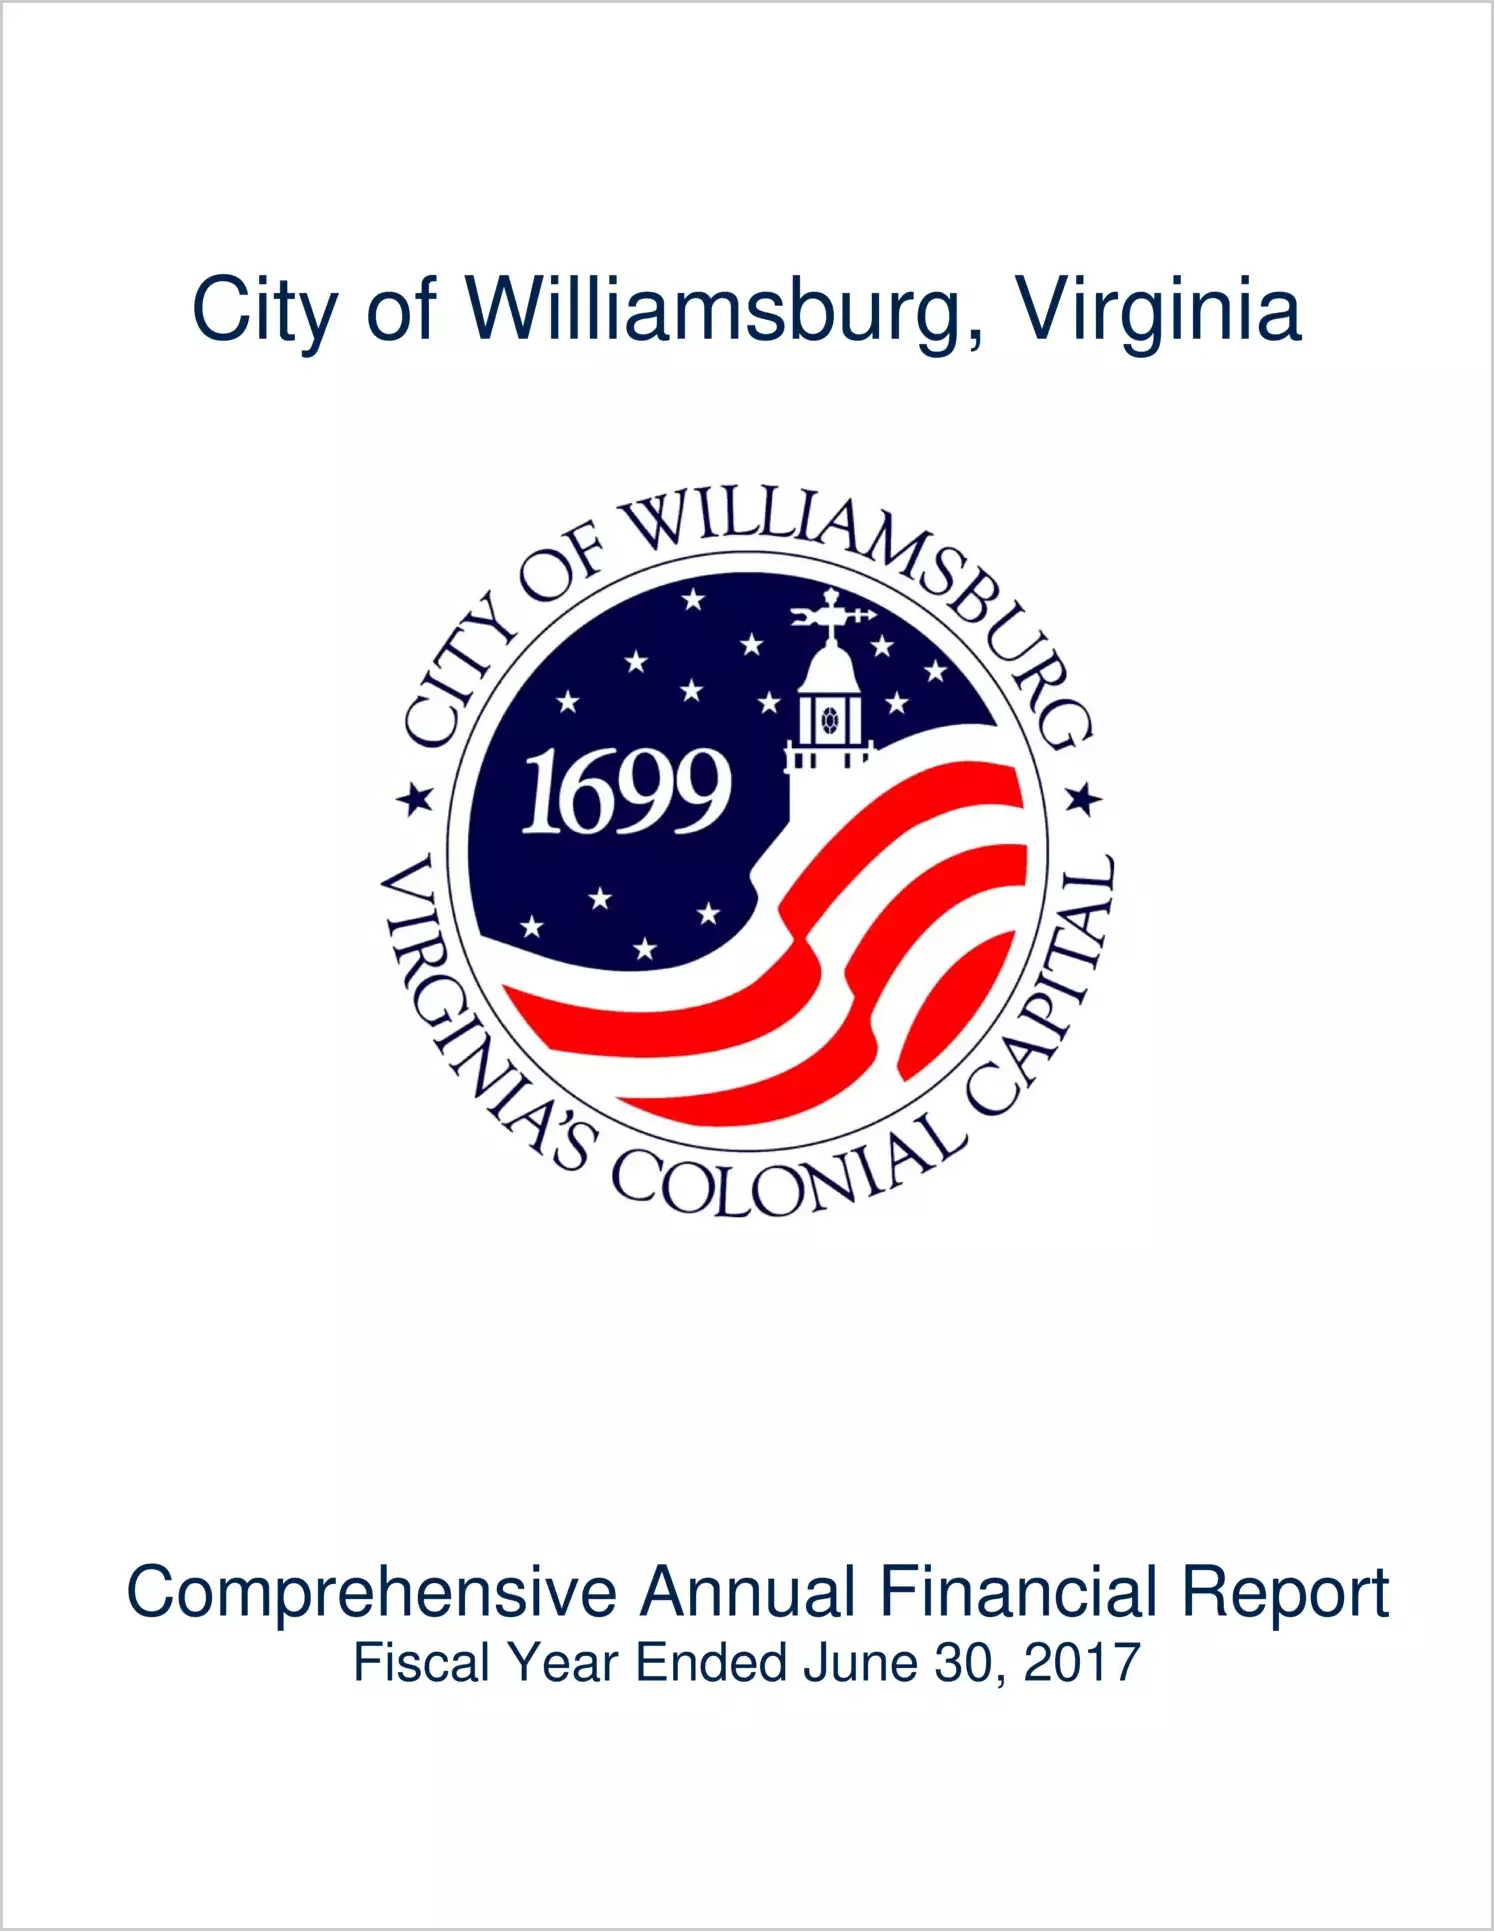 2017 Annual Financial Report for City of Williamsburg